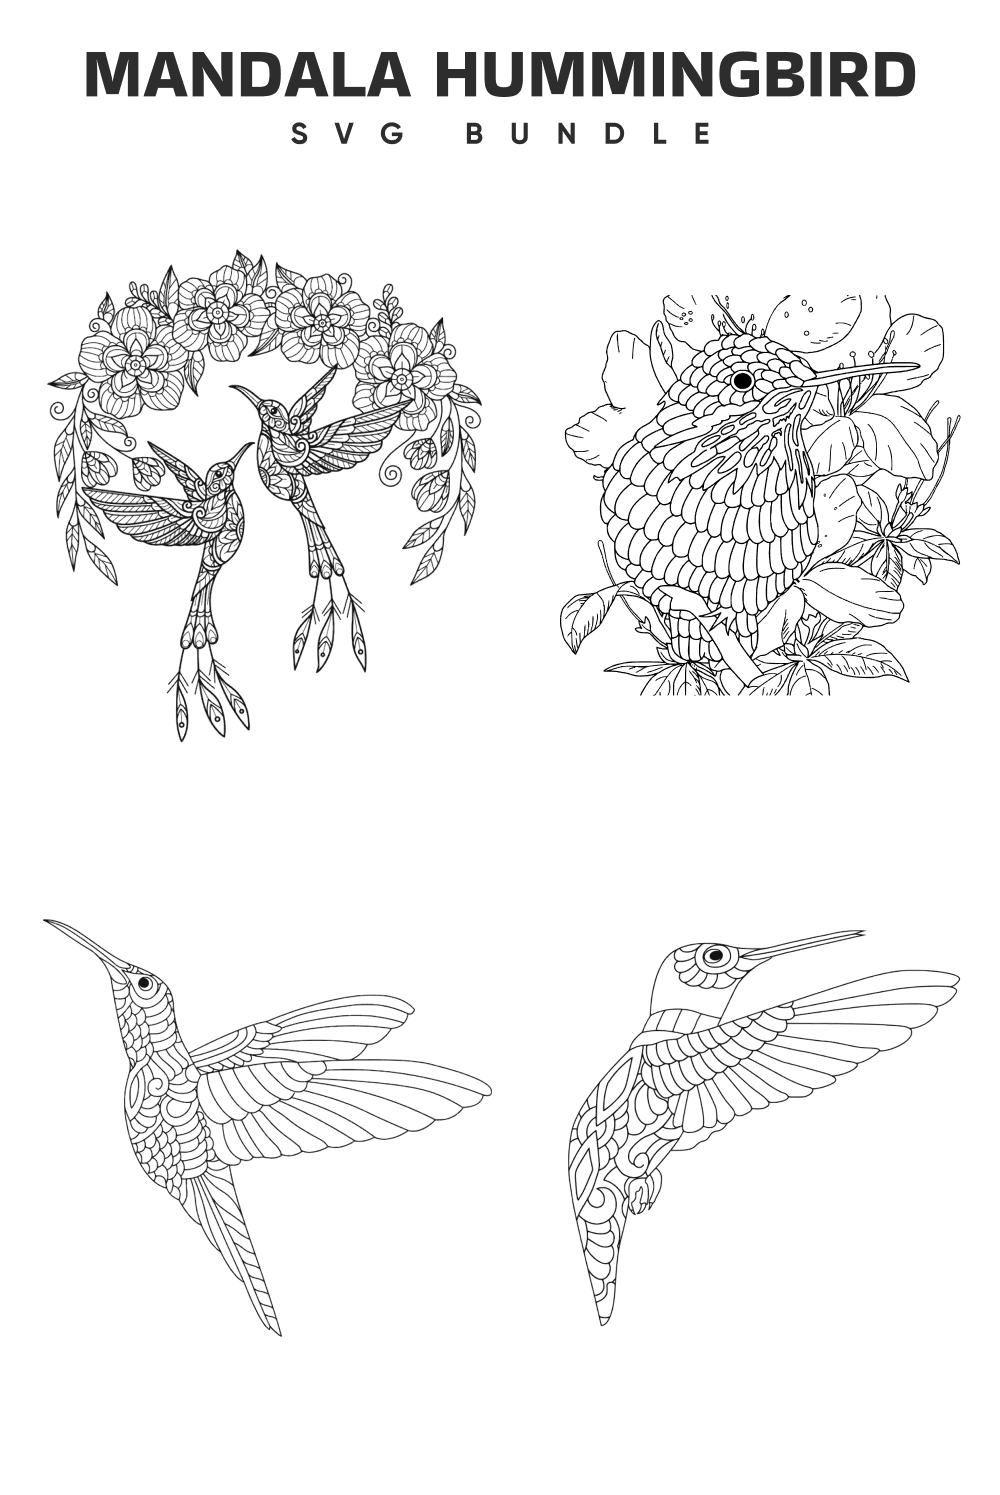 Coloring page with a hummingbird and flowers.